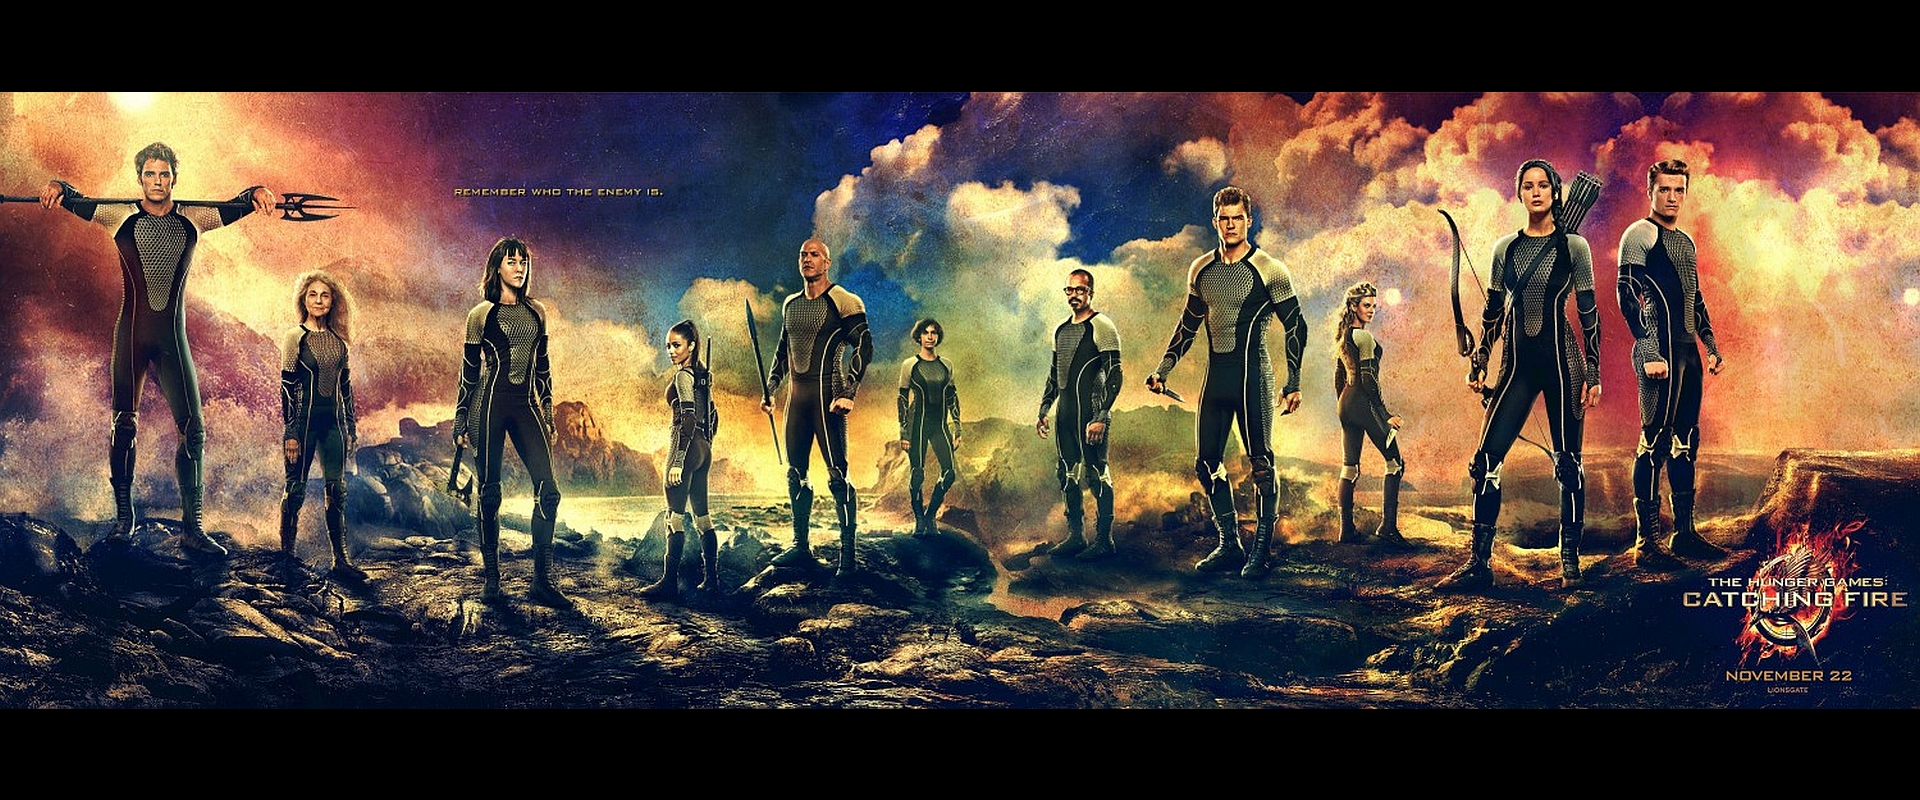 Movie The Hunger Games Catching Fire 1920x800